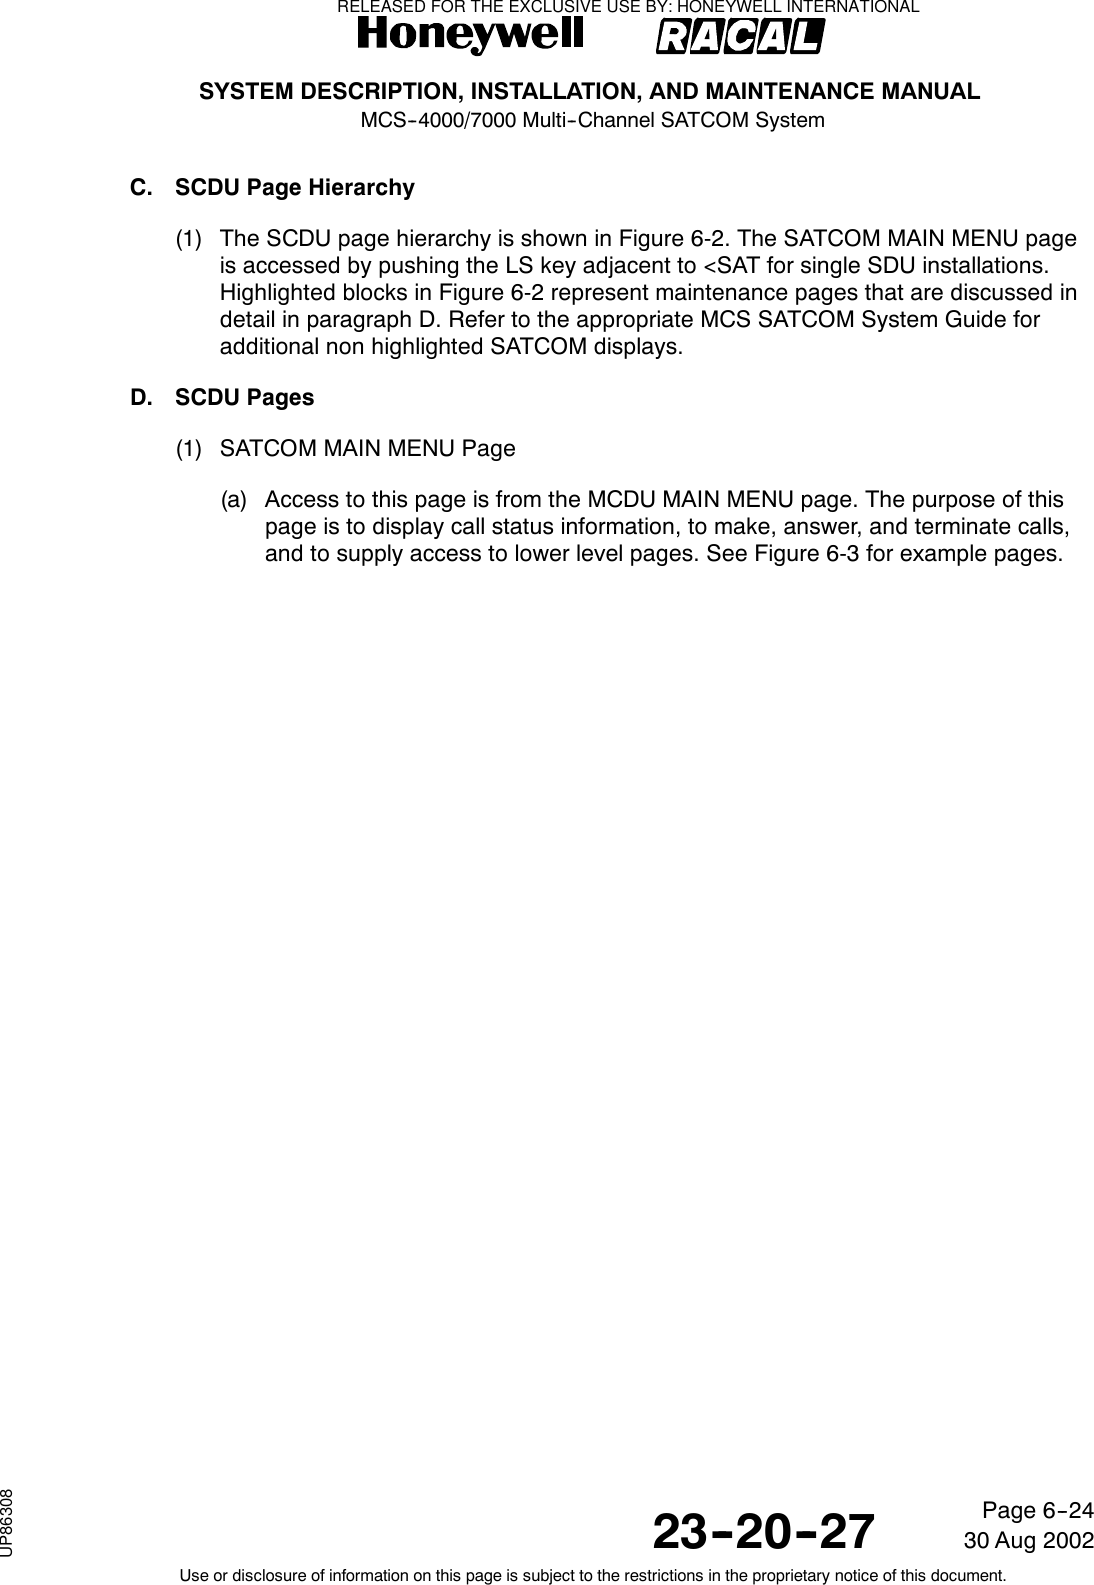 SYSTEM DESCRIPTION, INSTALLATION, AND MAINTENANCE MANUALMCS--4000/7000 Multi--Channel SATCOM System23--20--2730 Aug 2002Use or disclosure of information on this page is subject to the restrictions in the proprietary notice of this document.Page 6--24C. SCDU Page Hierarchy(1) The SCDU page hierarchy is shown in Figure 6-2. The SATCOM MAIN MENU pageis accessed by pushing the LS key adjacent to &lt;SAT for single SDU installations.Highlighted blocks in Figure 6-2 represent maintenance pages that are discussed indetail in paragraph D. Refer to the appropriate MCS SATCOM System Guide foradditional non highlighted SATCOM displays.D. SCDU Pages(1) SATCOM MAIN MENU Page(a) Access to this page is from the MCDU MAIN MENU page. The purpose of thispage is to display call status information, to make, answer, and terminate calls,and to supply access to lower level pages. See Figure 6-3 for example pages.RELEASED FOR THE EXCLUSIVE USE BY: HONEYWELL INTERNATIONALUP86308